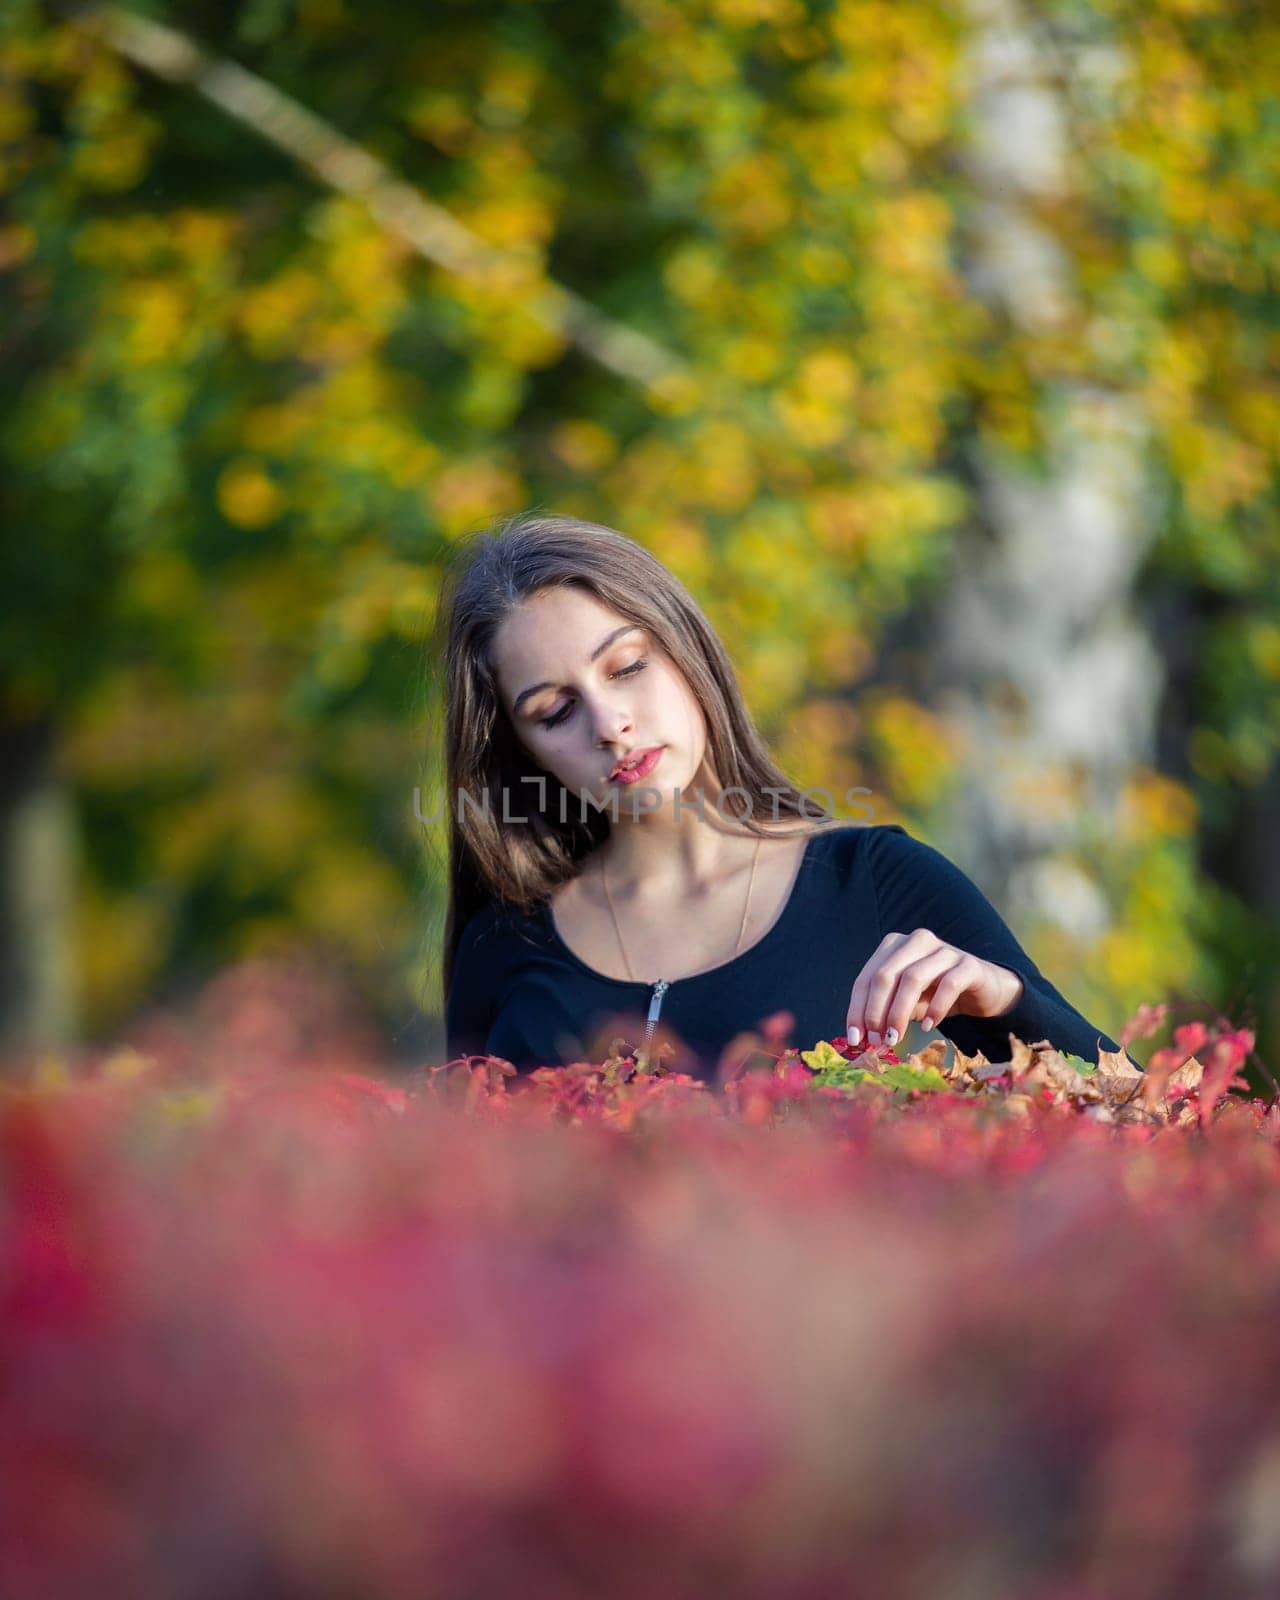 Portrait of a beautiful girl near a red-yellow bush in an autumn park. by Yurich32